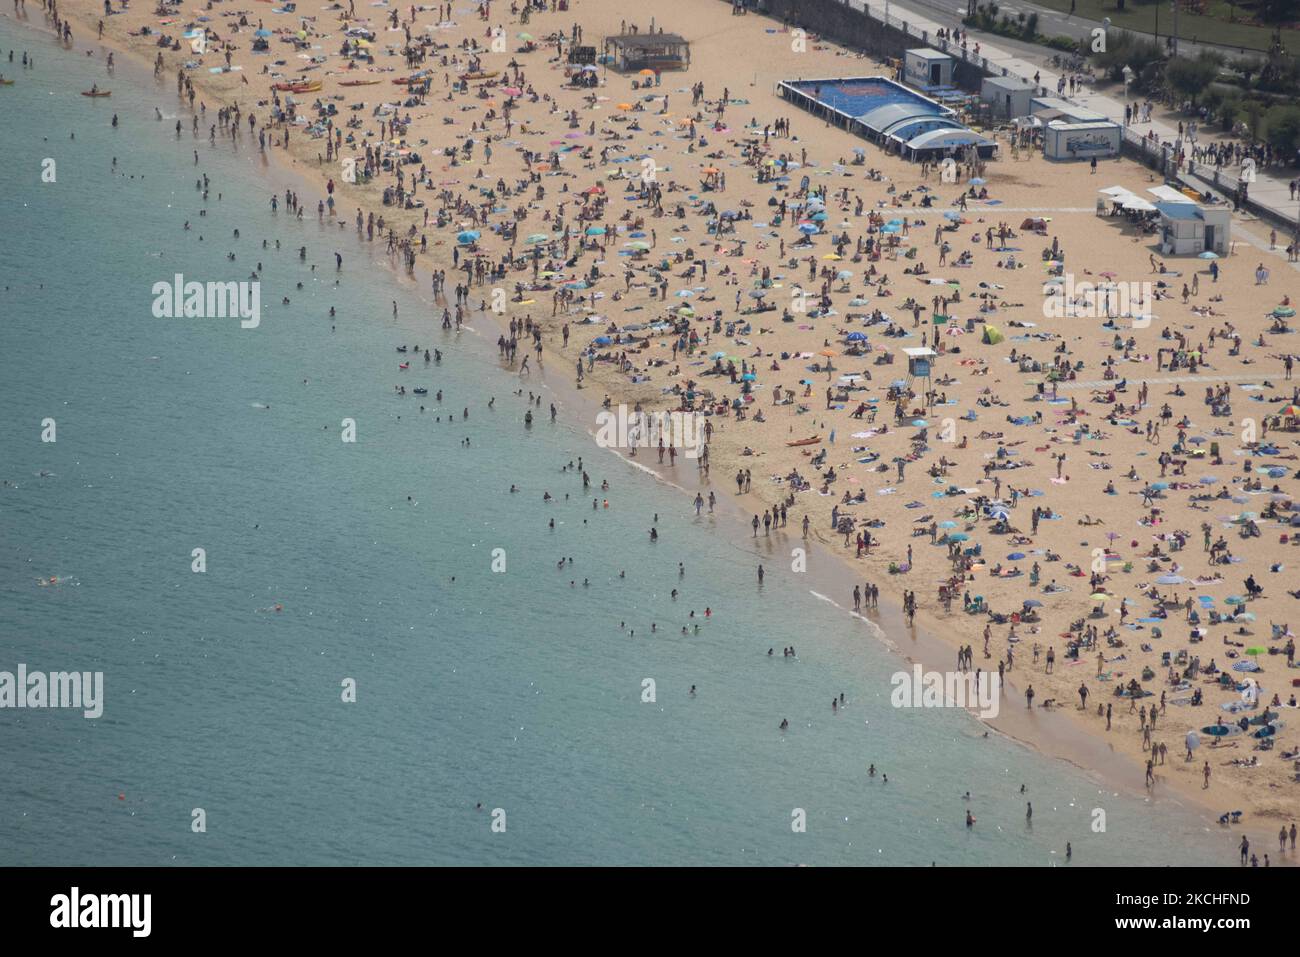 View of Ondarreta beach in San Sebastian crowded of people, on July 20, 2021. Beachgoers have gathered at the beaches on San Sebastian, Spain at temperatures of almost 30 degrees. Many tourists enjoy sun, sand, waves and sea at the beaches of Spain. (Photo by Manuel Balles/NurPhoto) Stock Photo